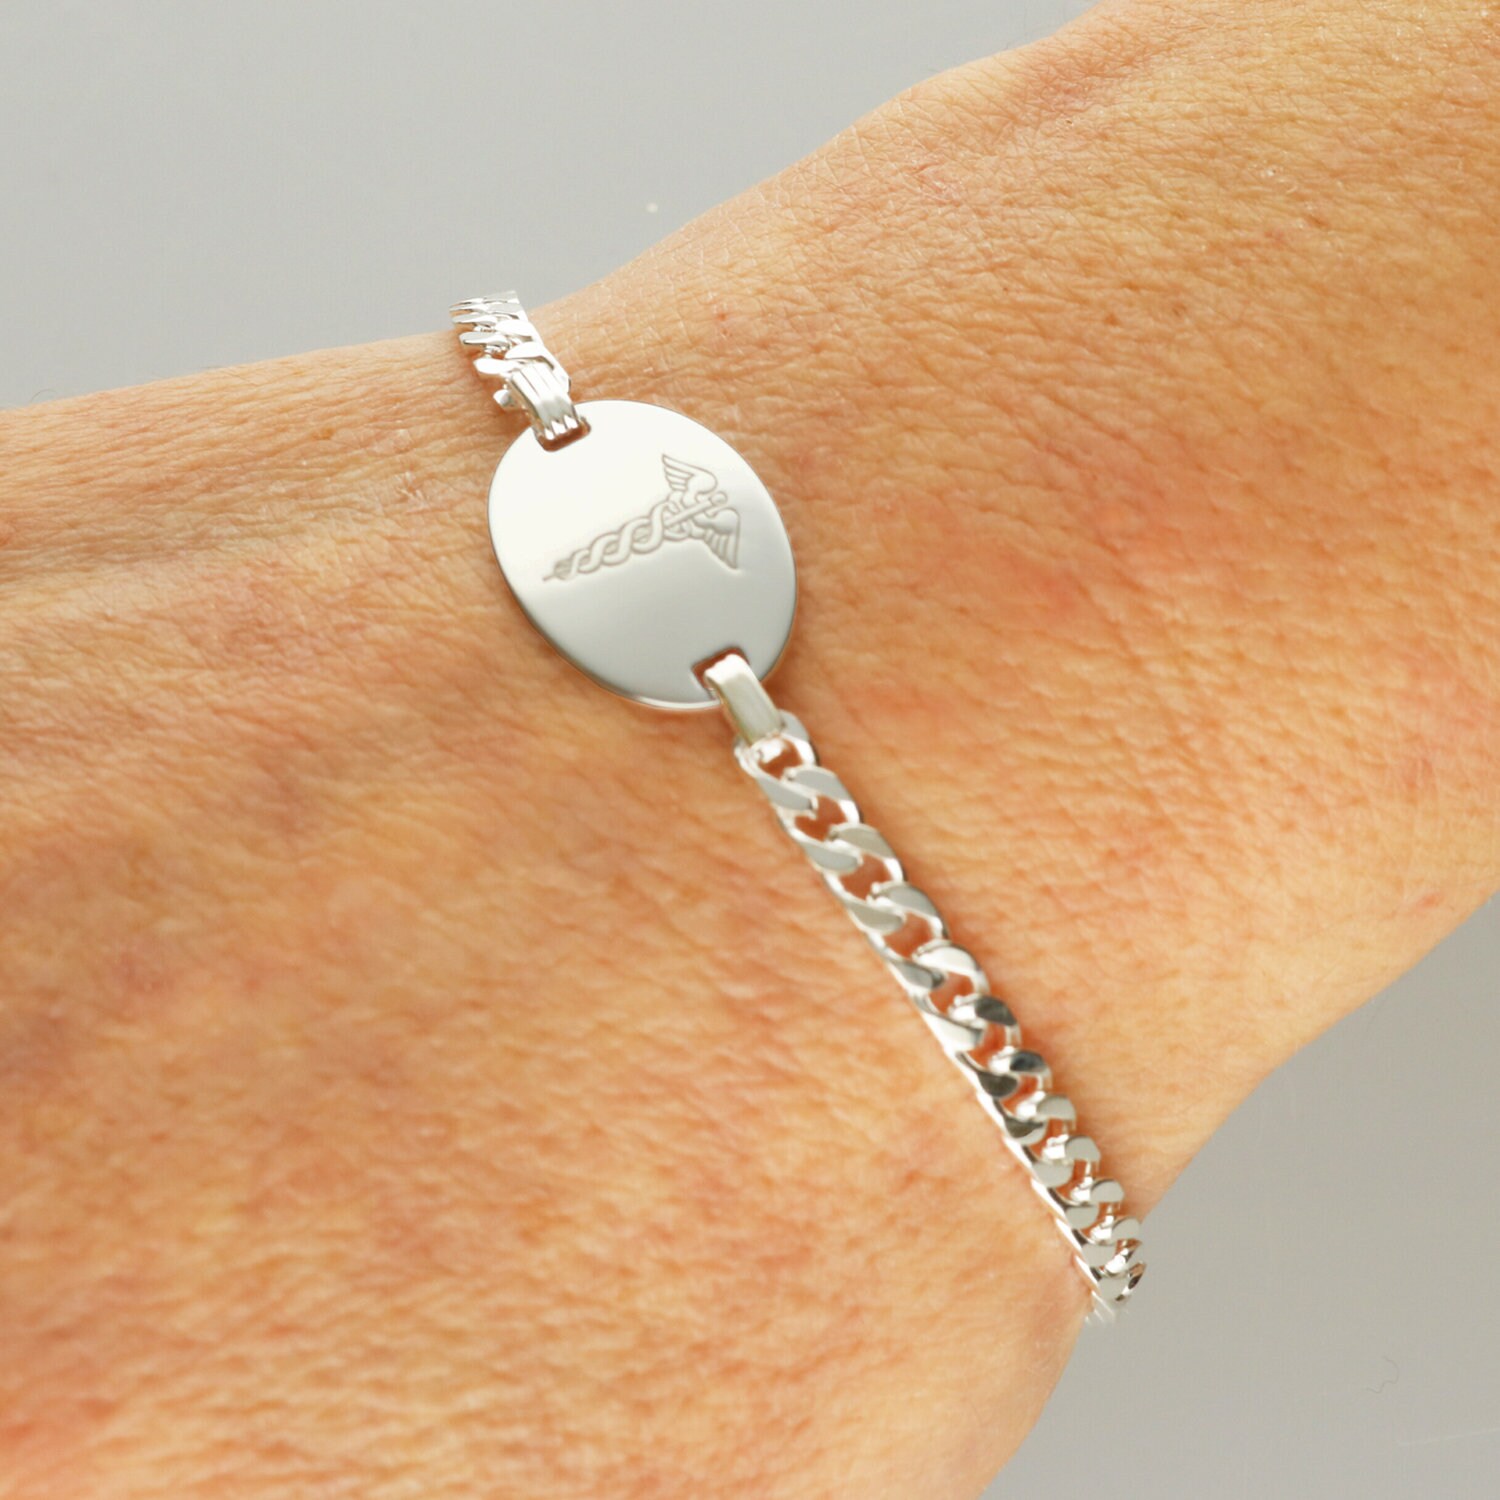 One Day at a Time Bracelet Silver Sieraden Armbanden ID- & Medische armbanden One Day at a Time 